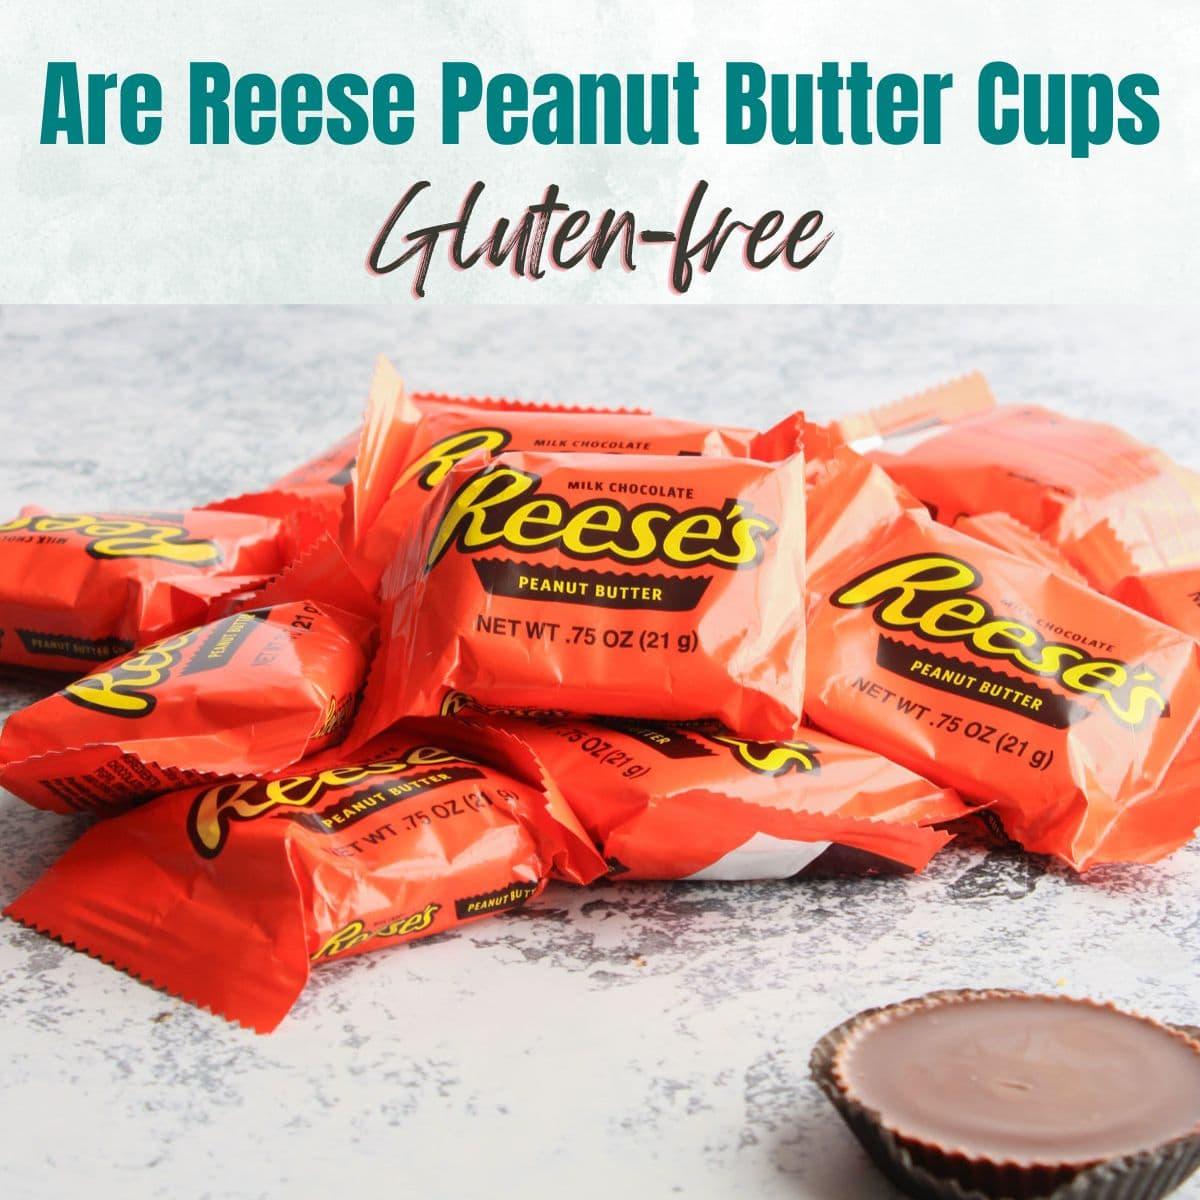 Graphic asking the question, "Are Reese